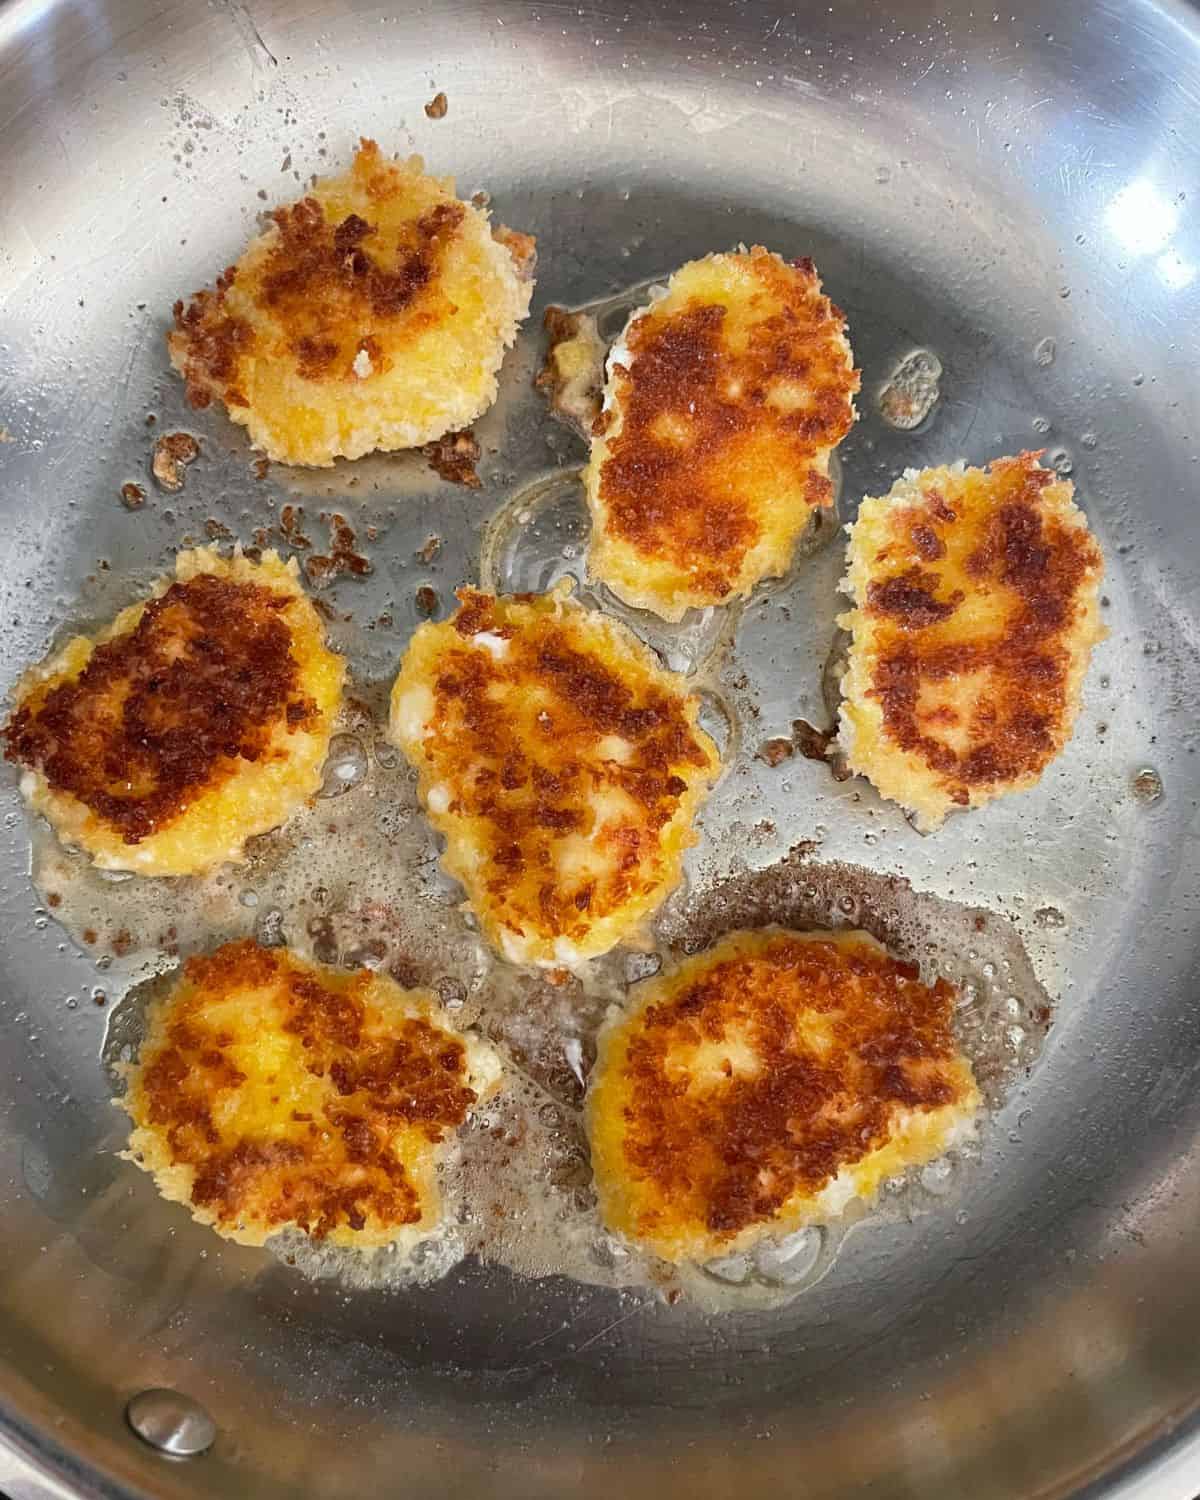 Panko goat cheese frying in olive oil in a stainless steel frying pan.